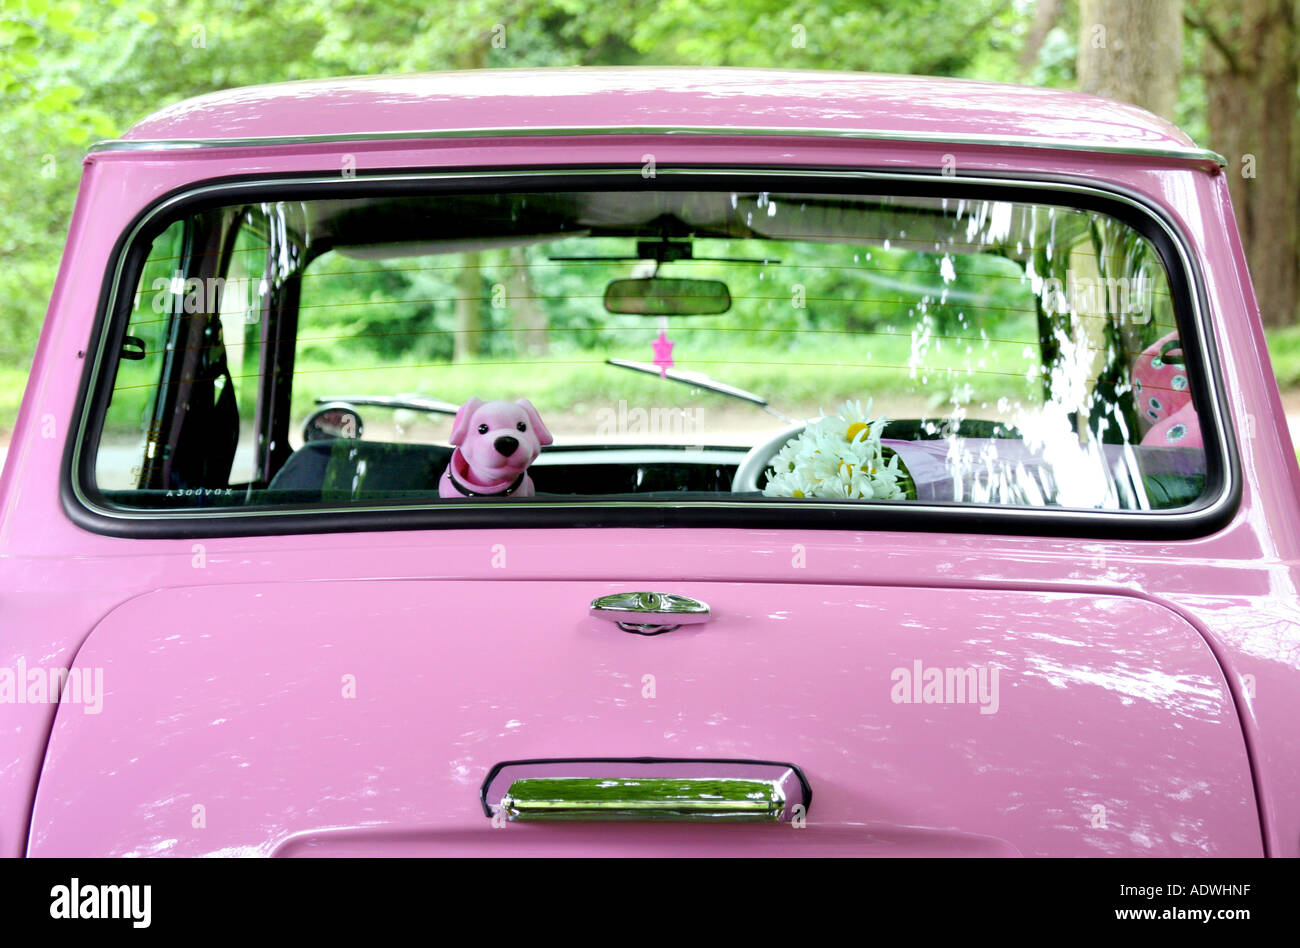 Rear of pink mini with pink nodding dog on parcel shelf Stock Photo